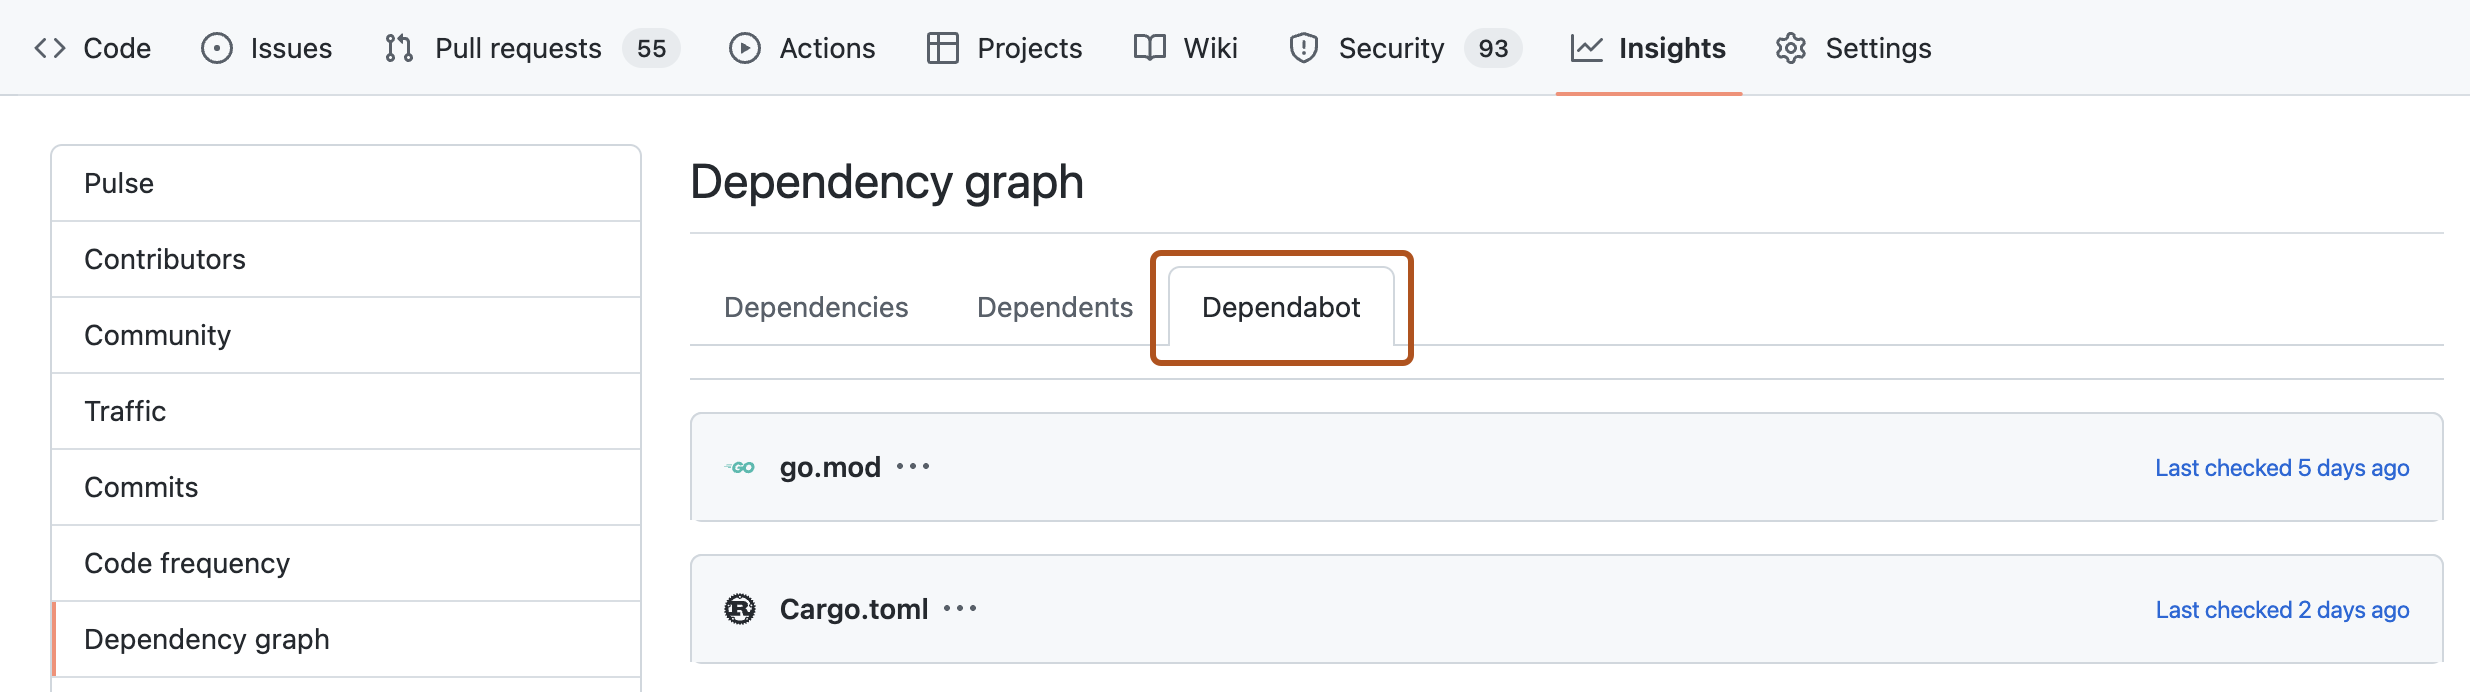 Screenshot of the Dependency graph page. A tab, titled "Dependabot", is highlighted with an orange outline.